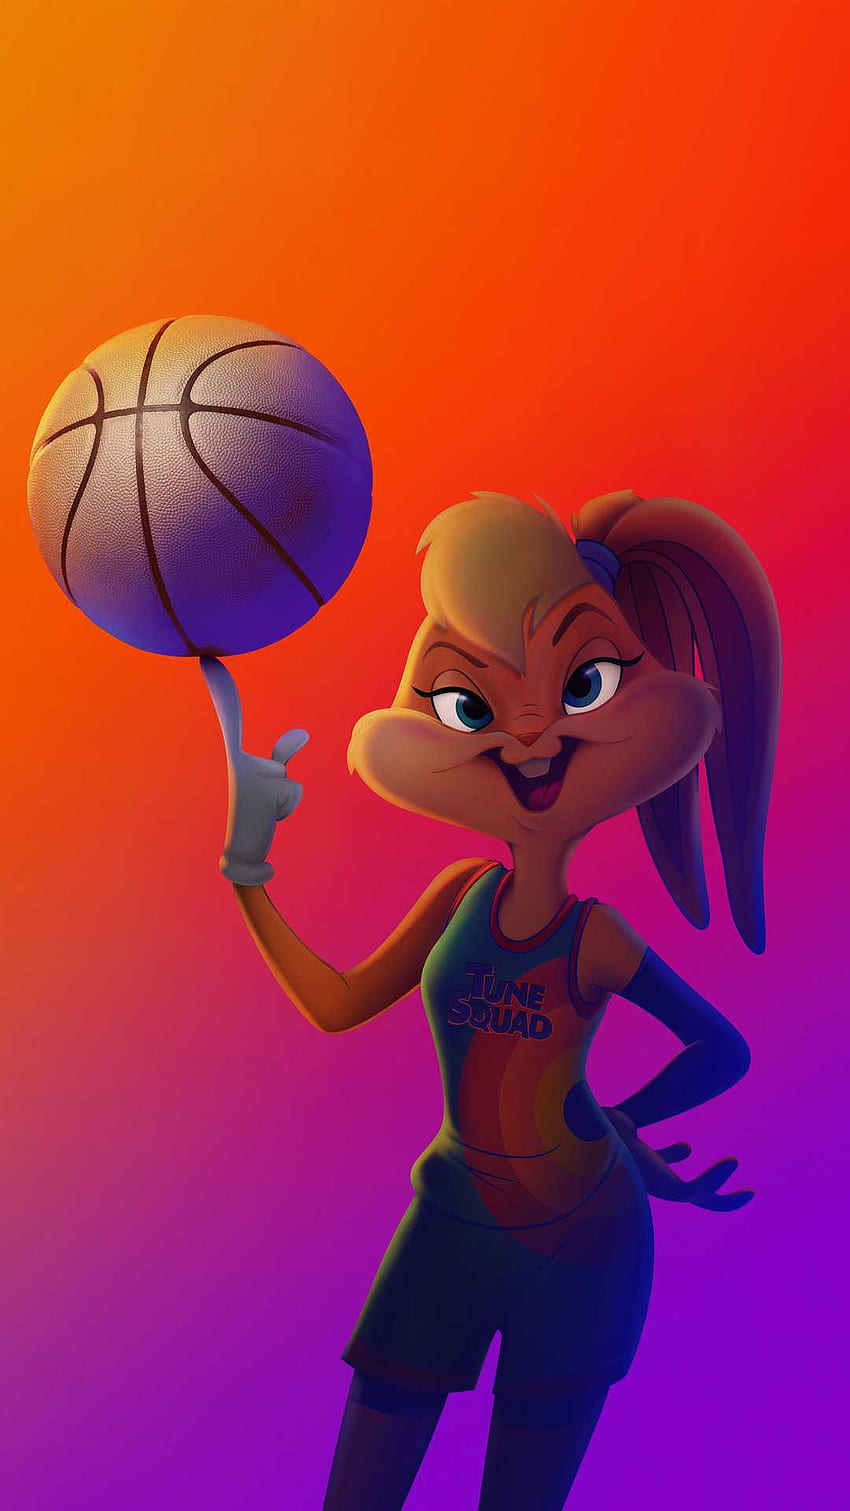 1920x1080px 1080p Free Download Lola Bunny Awesome Bugs Bunny And Lola Bunny Hd Phone